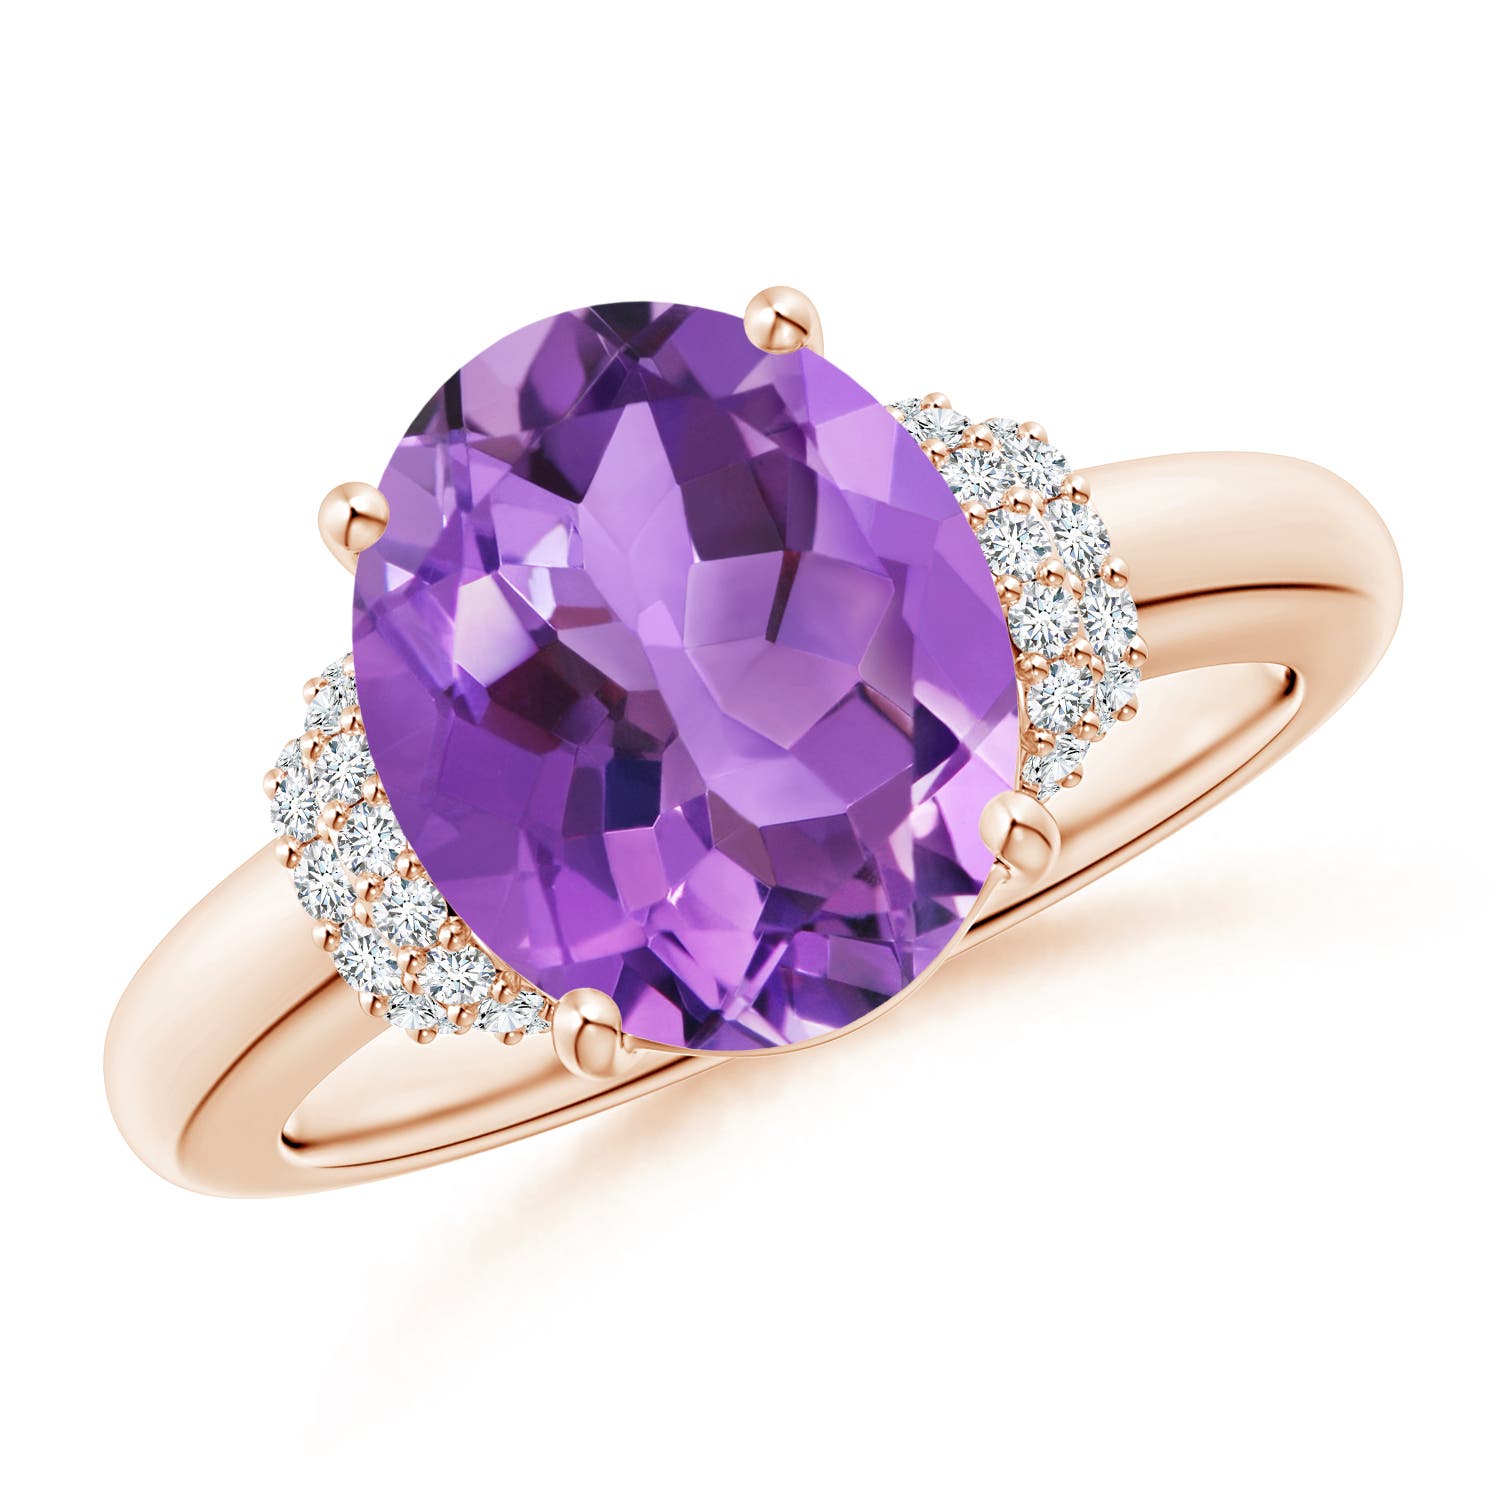 AA - Amethyst / 3.35 CT / 14 KT Rose Gold